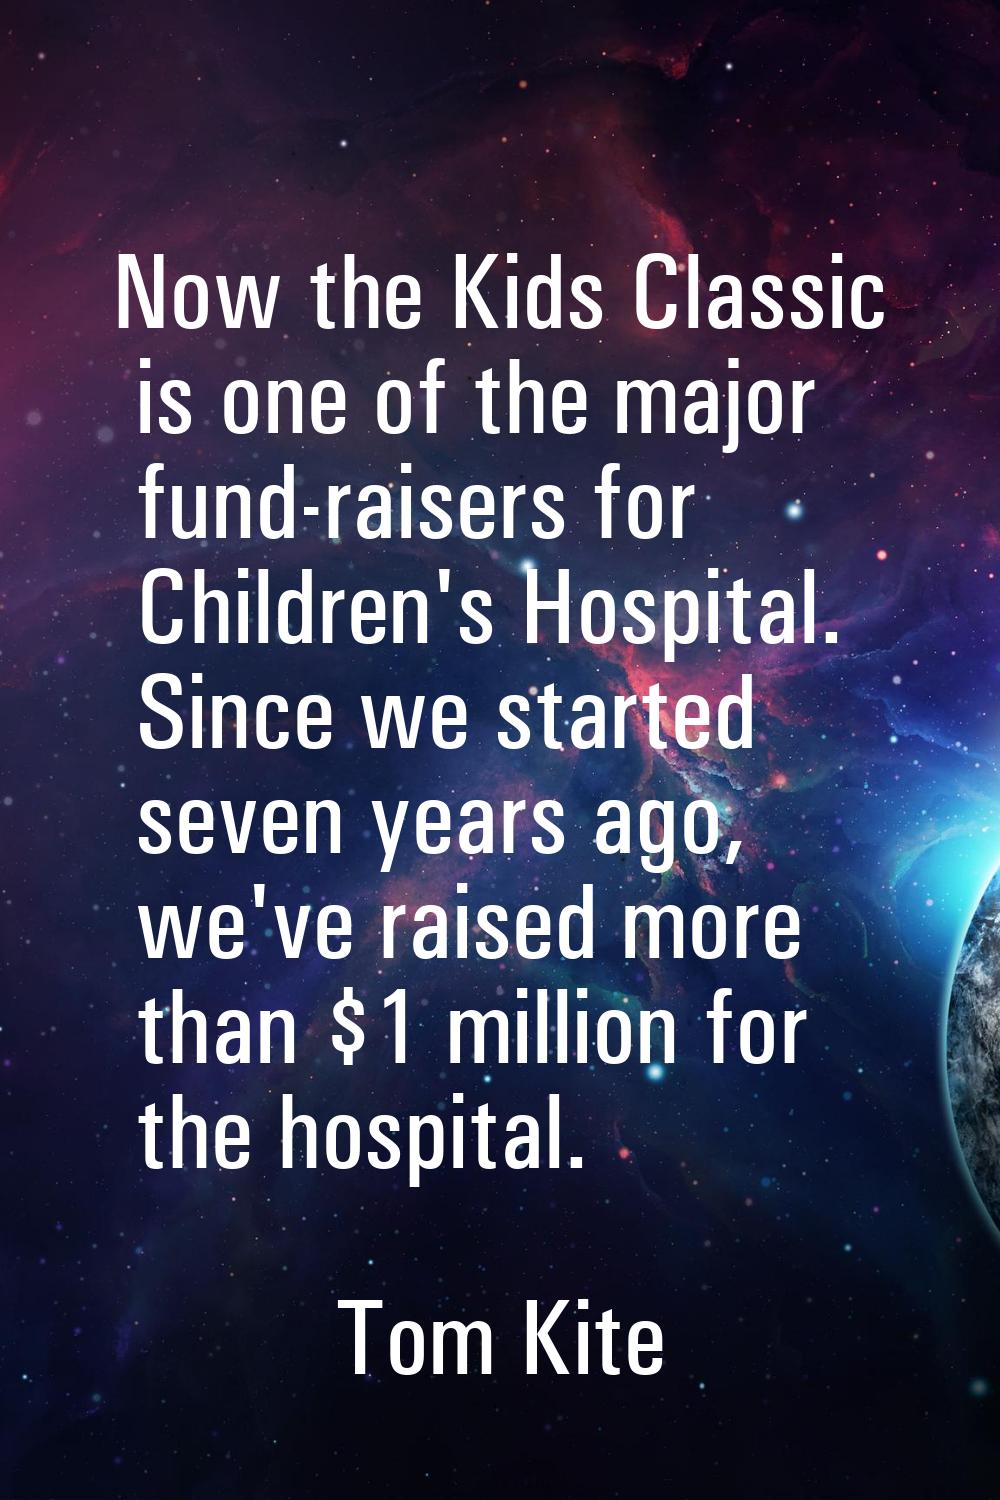 Now the Kids Classic is one of the major fund-raisers for Children's Hospital. Since we started sev